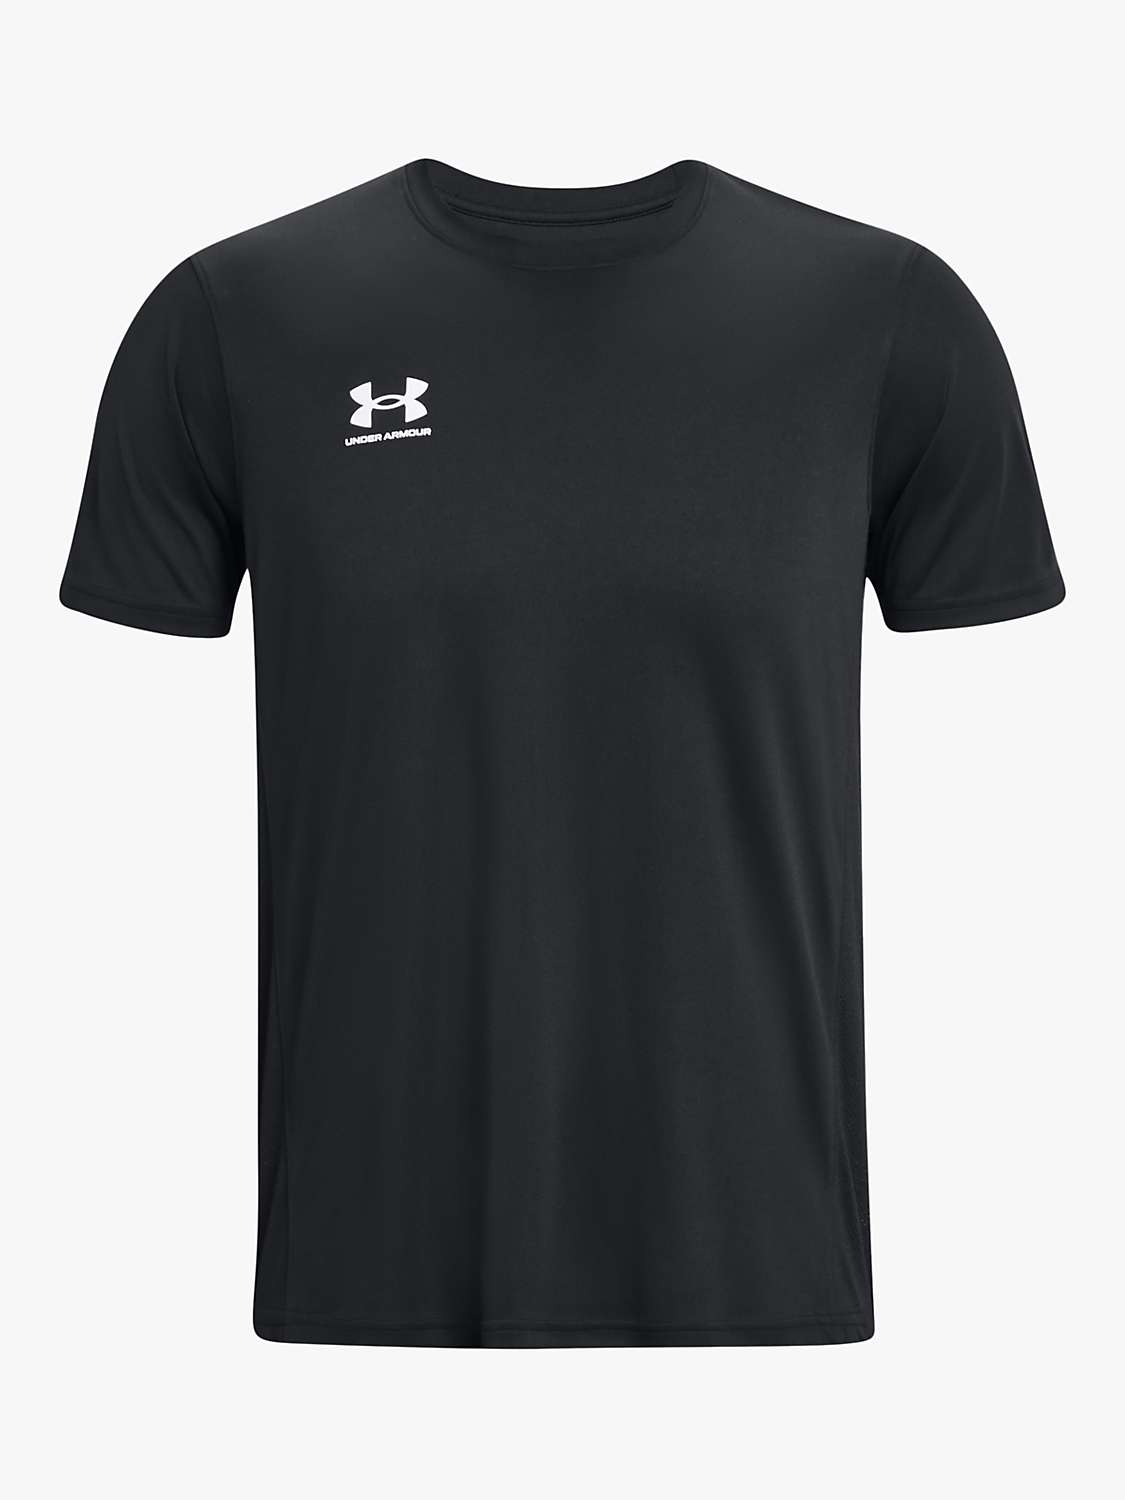 Buy Under Armour Challenger Training Short Sleeve Football Top Online at johnlewis.com